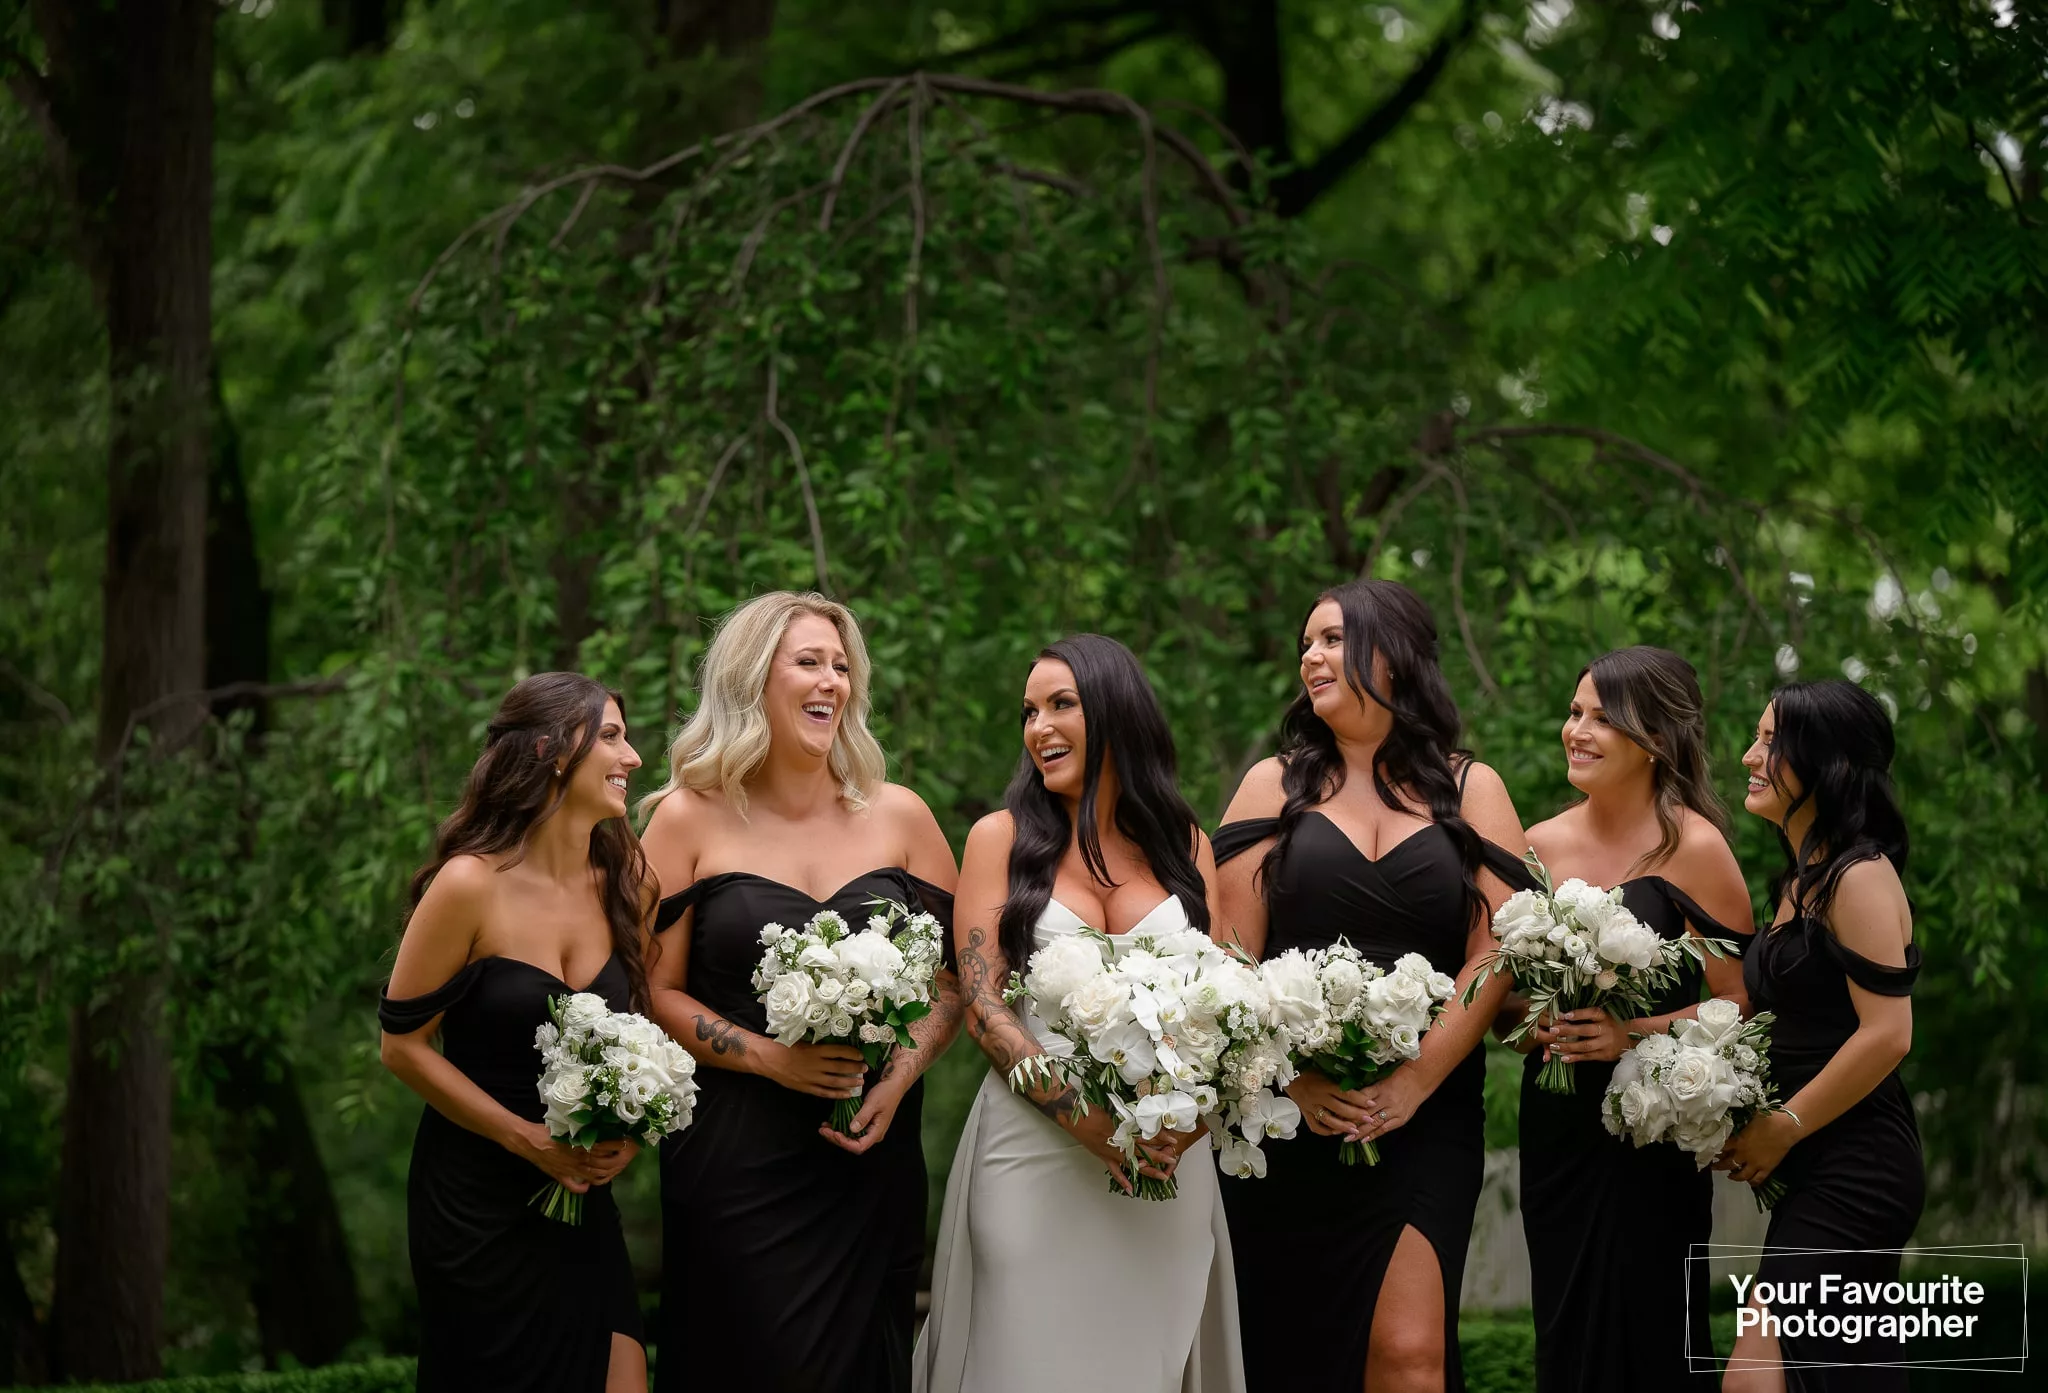 Bride with her bridesmaids in a black dresses and white flowers at The Doctor's House, standing in front of lush green trees